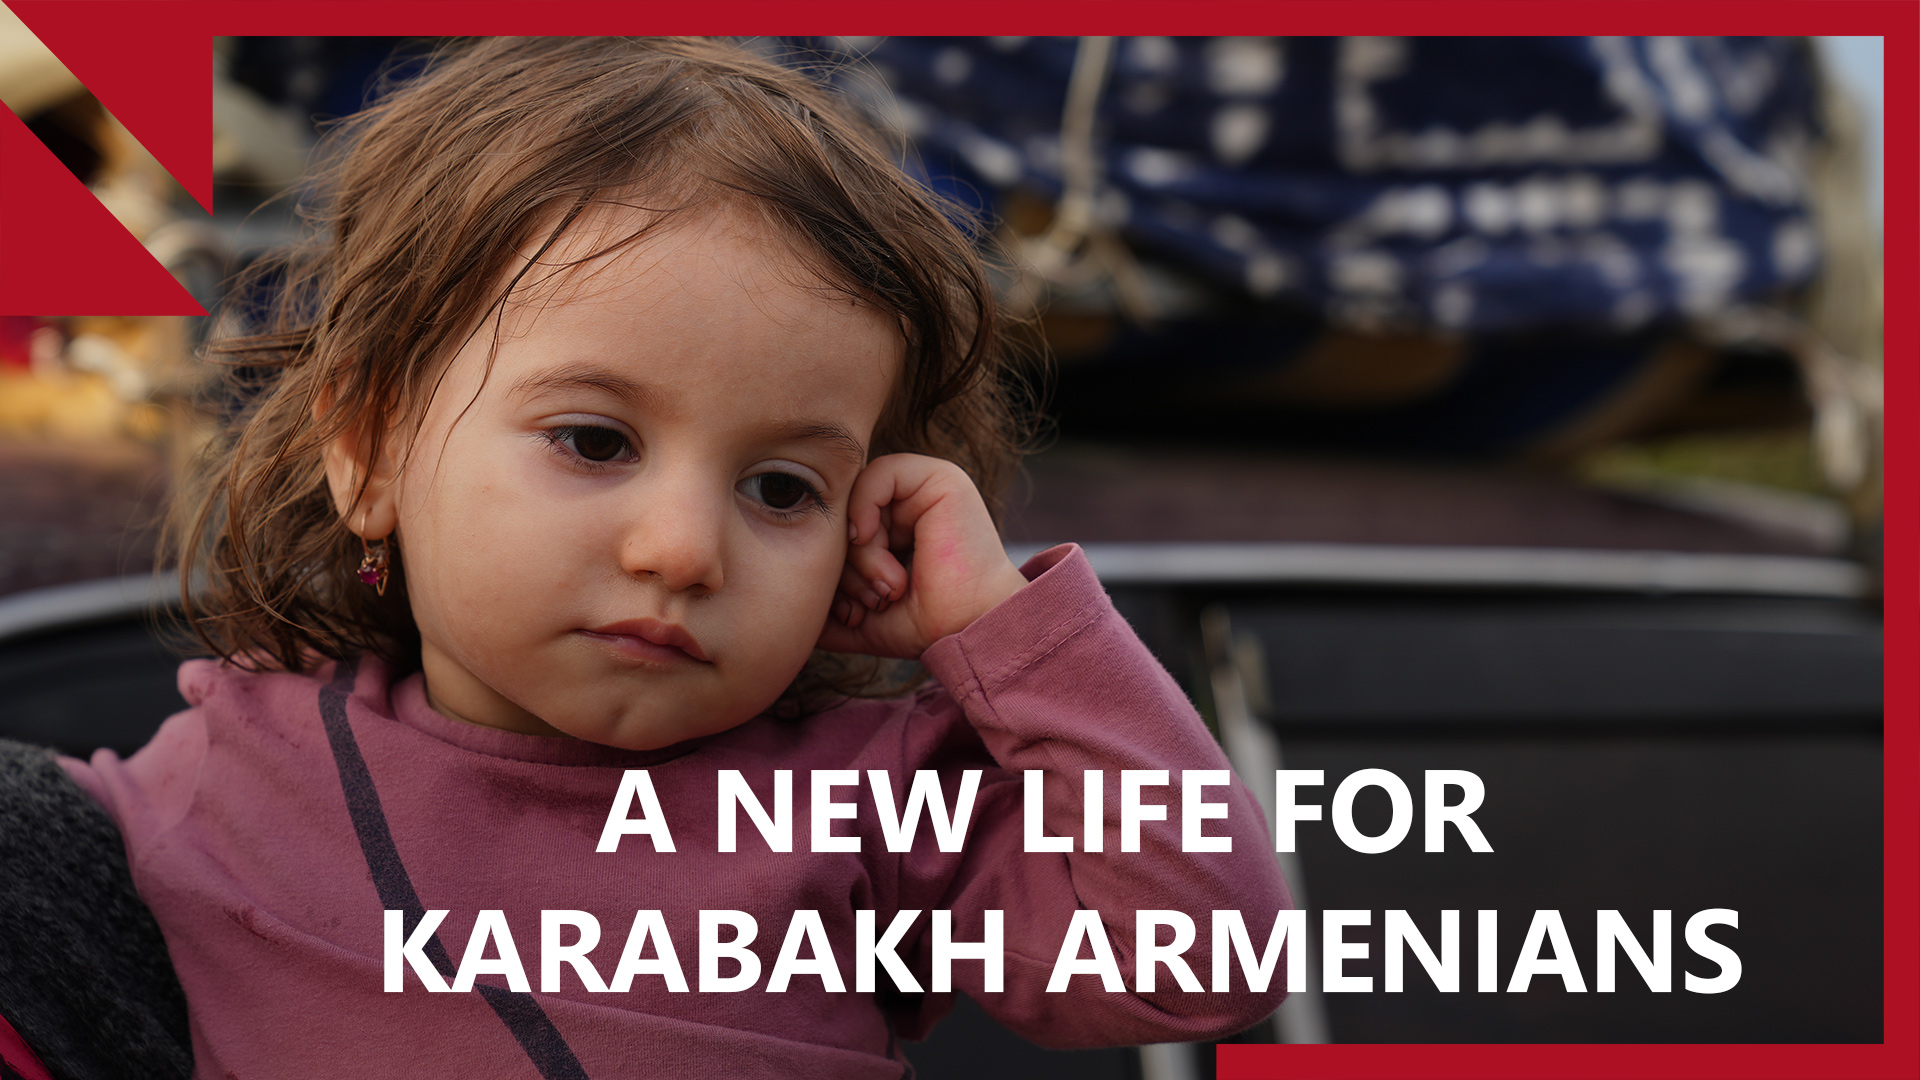 Fleeing for their lives, Armenians from Karabakh share stories of war and displacement